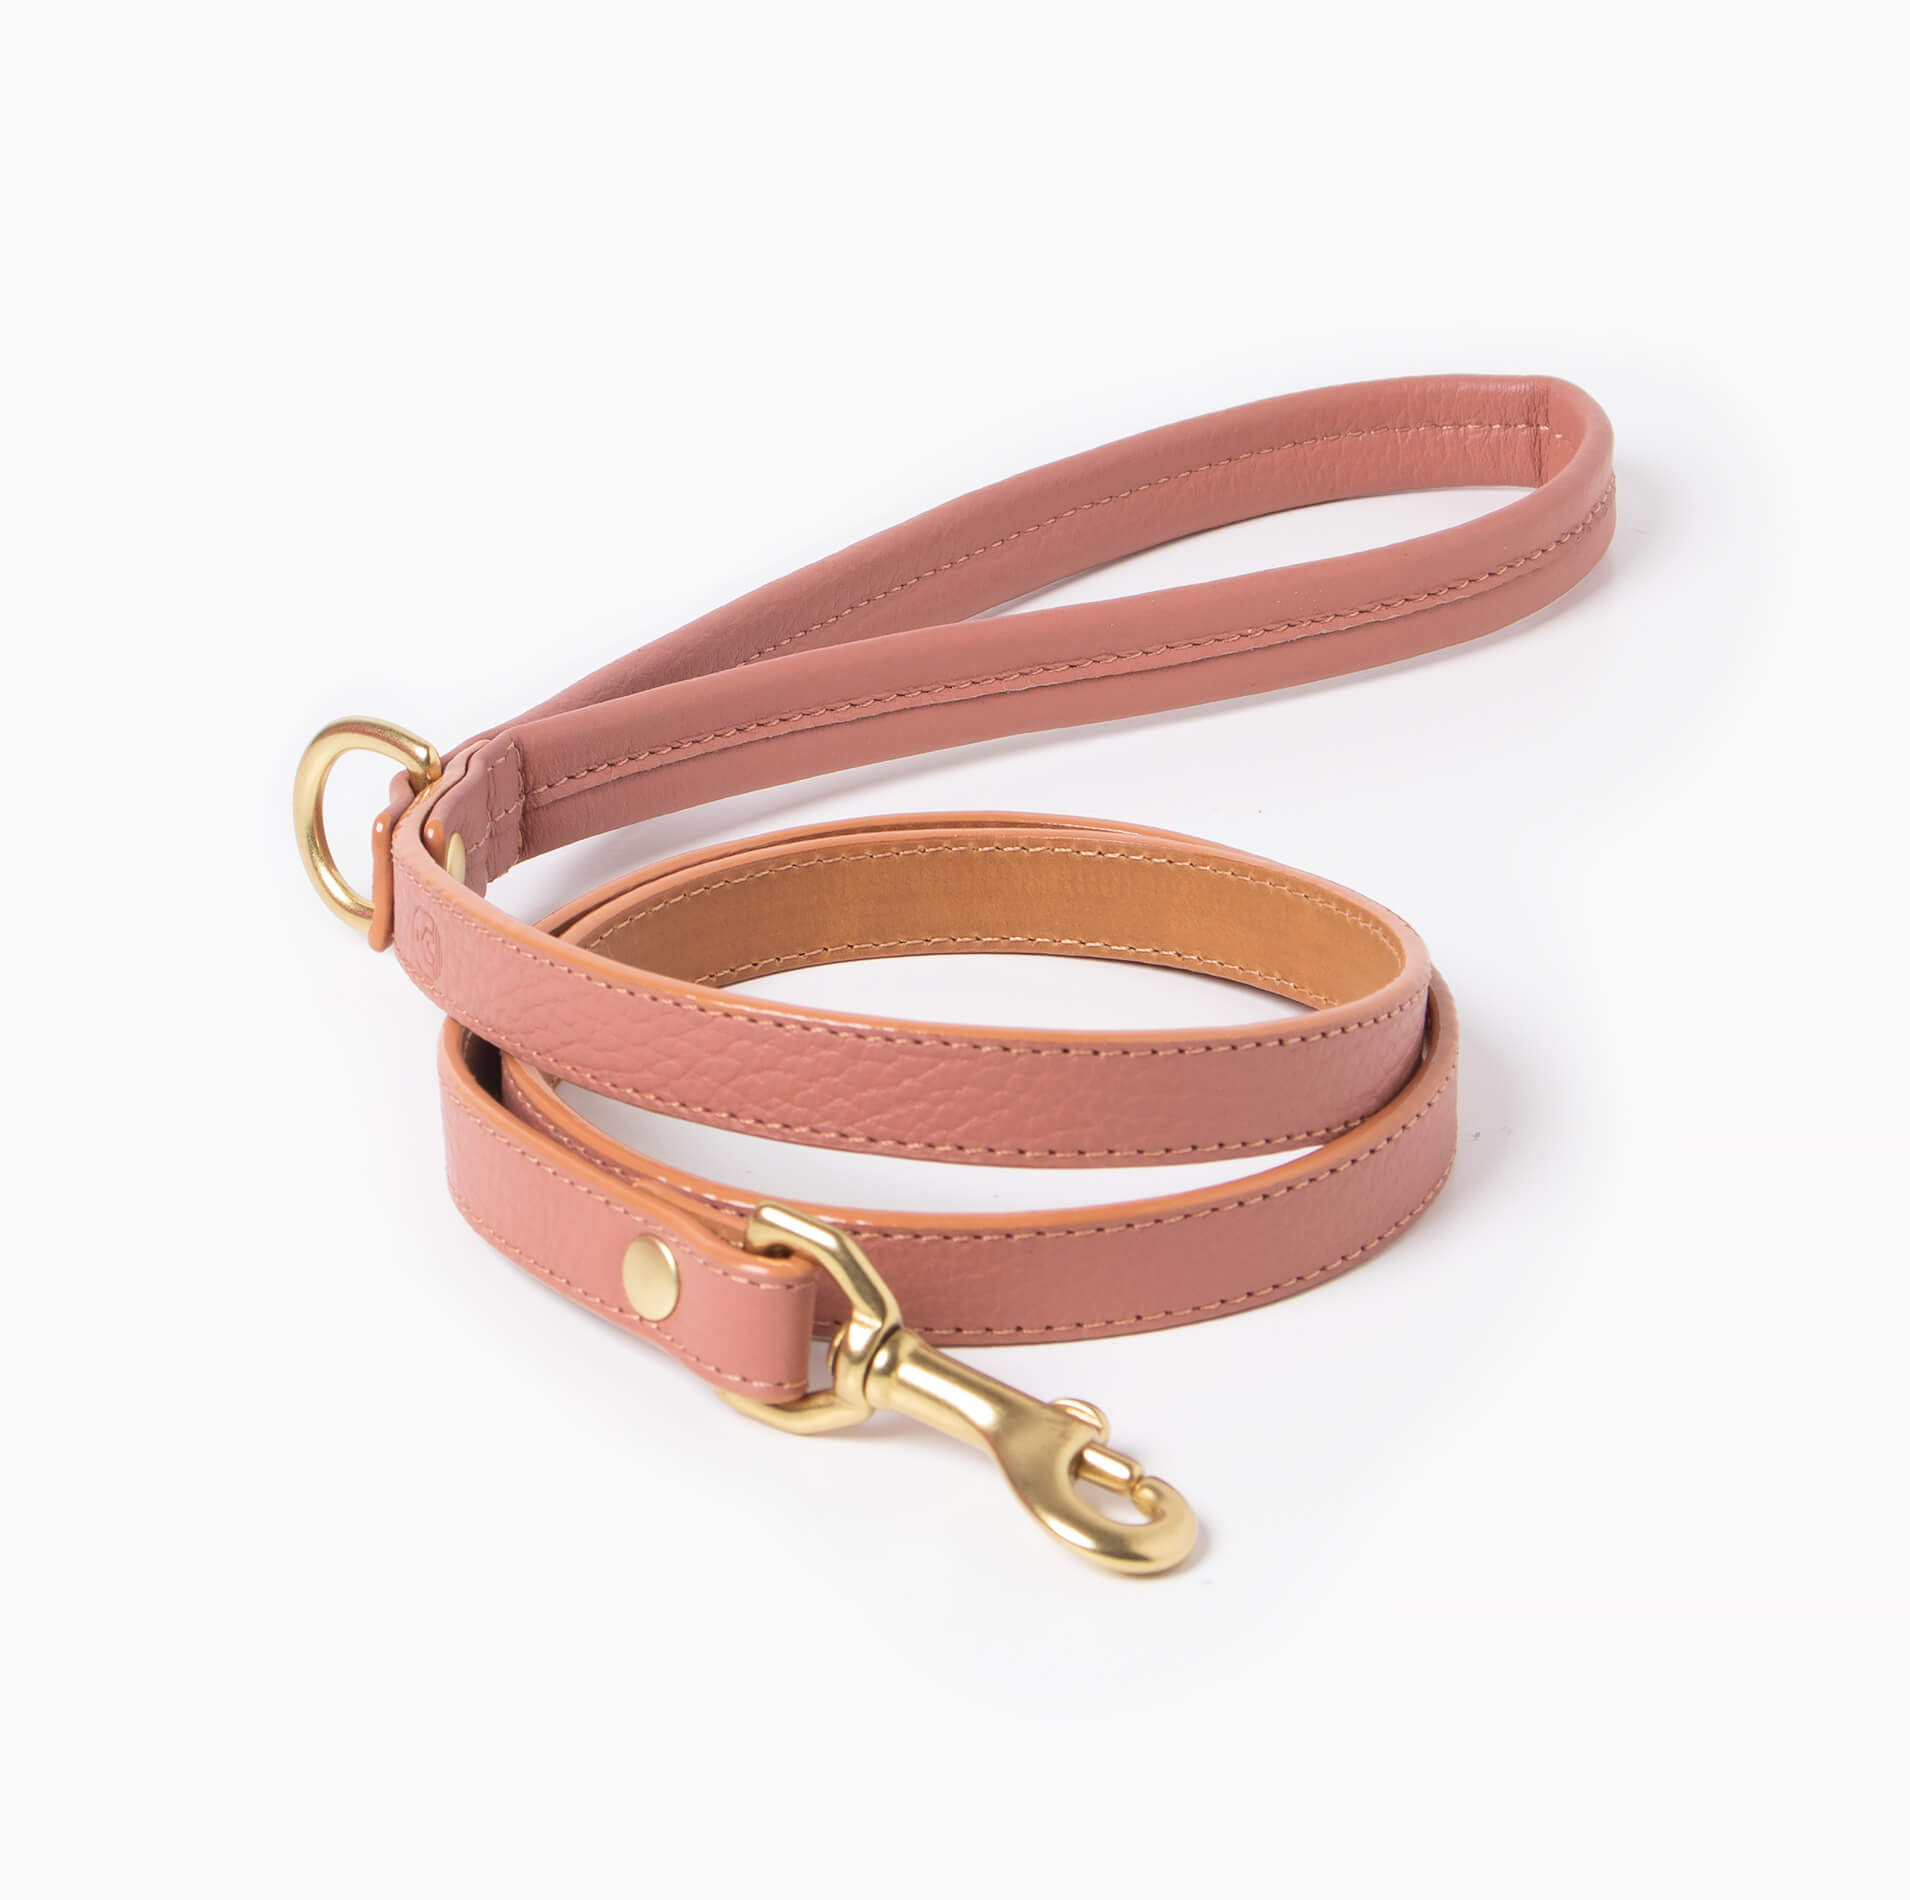 Nude Pink leather dog leash with brass hardware